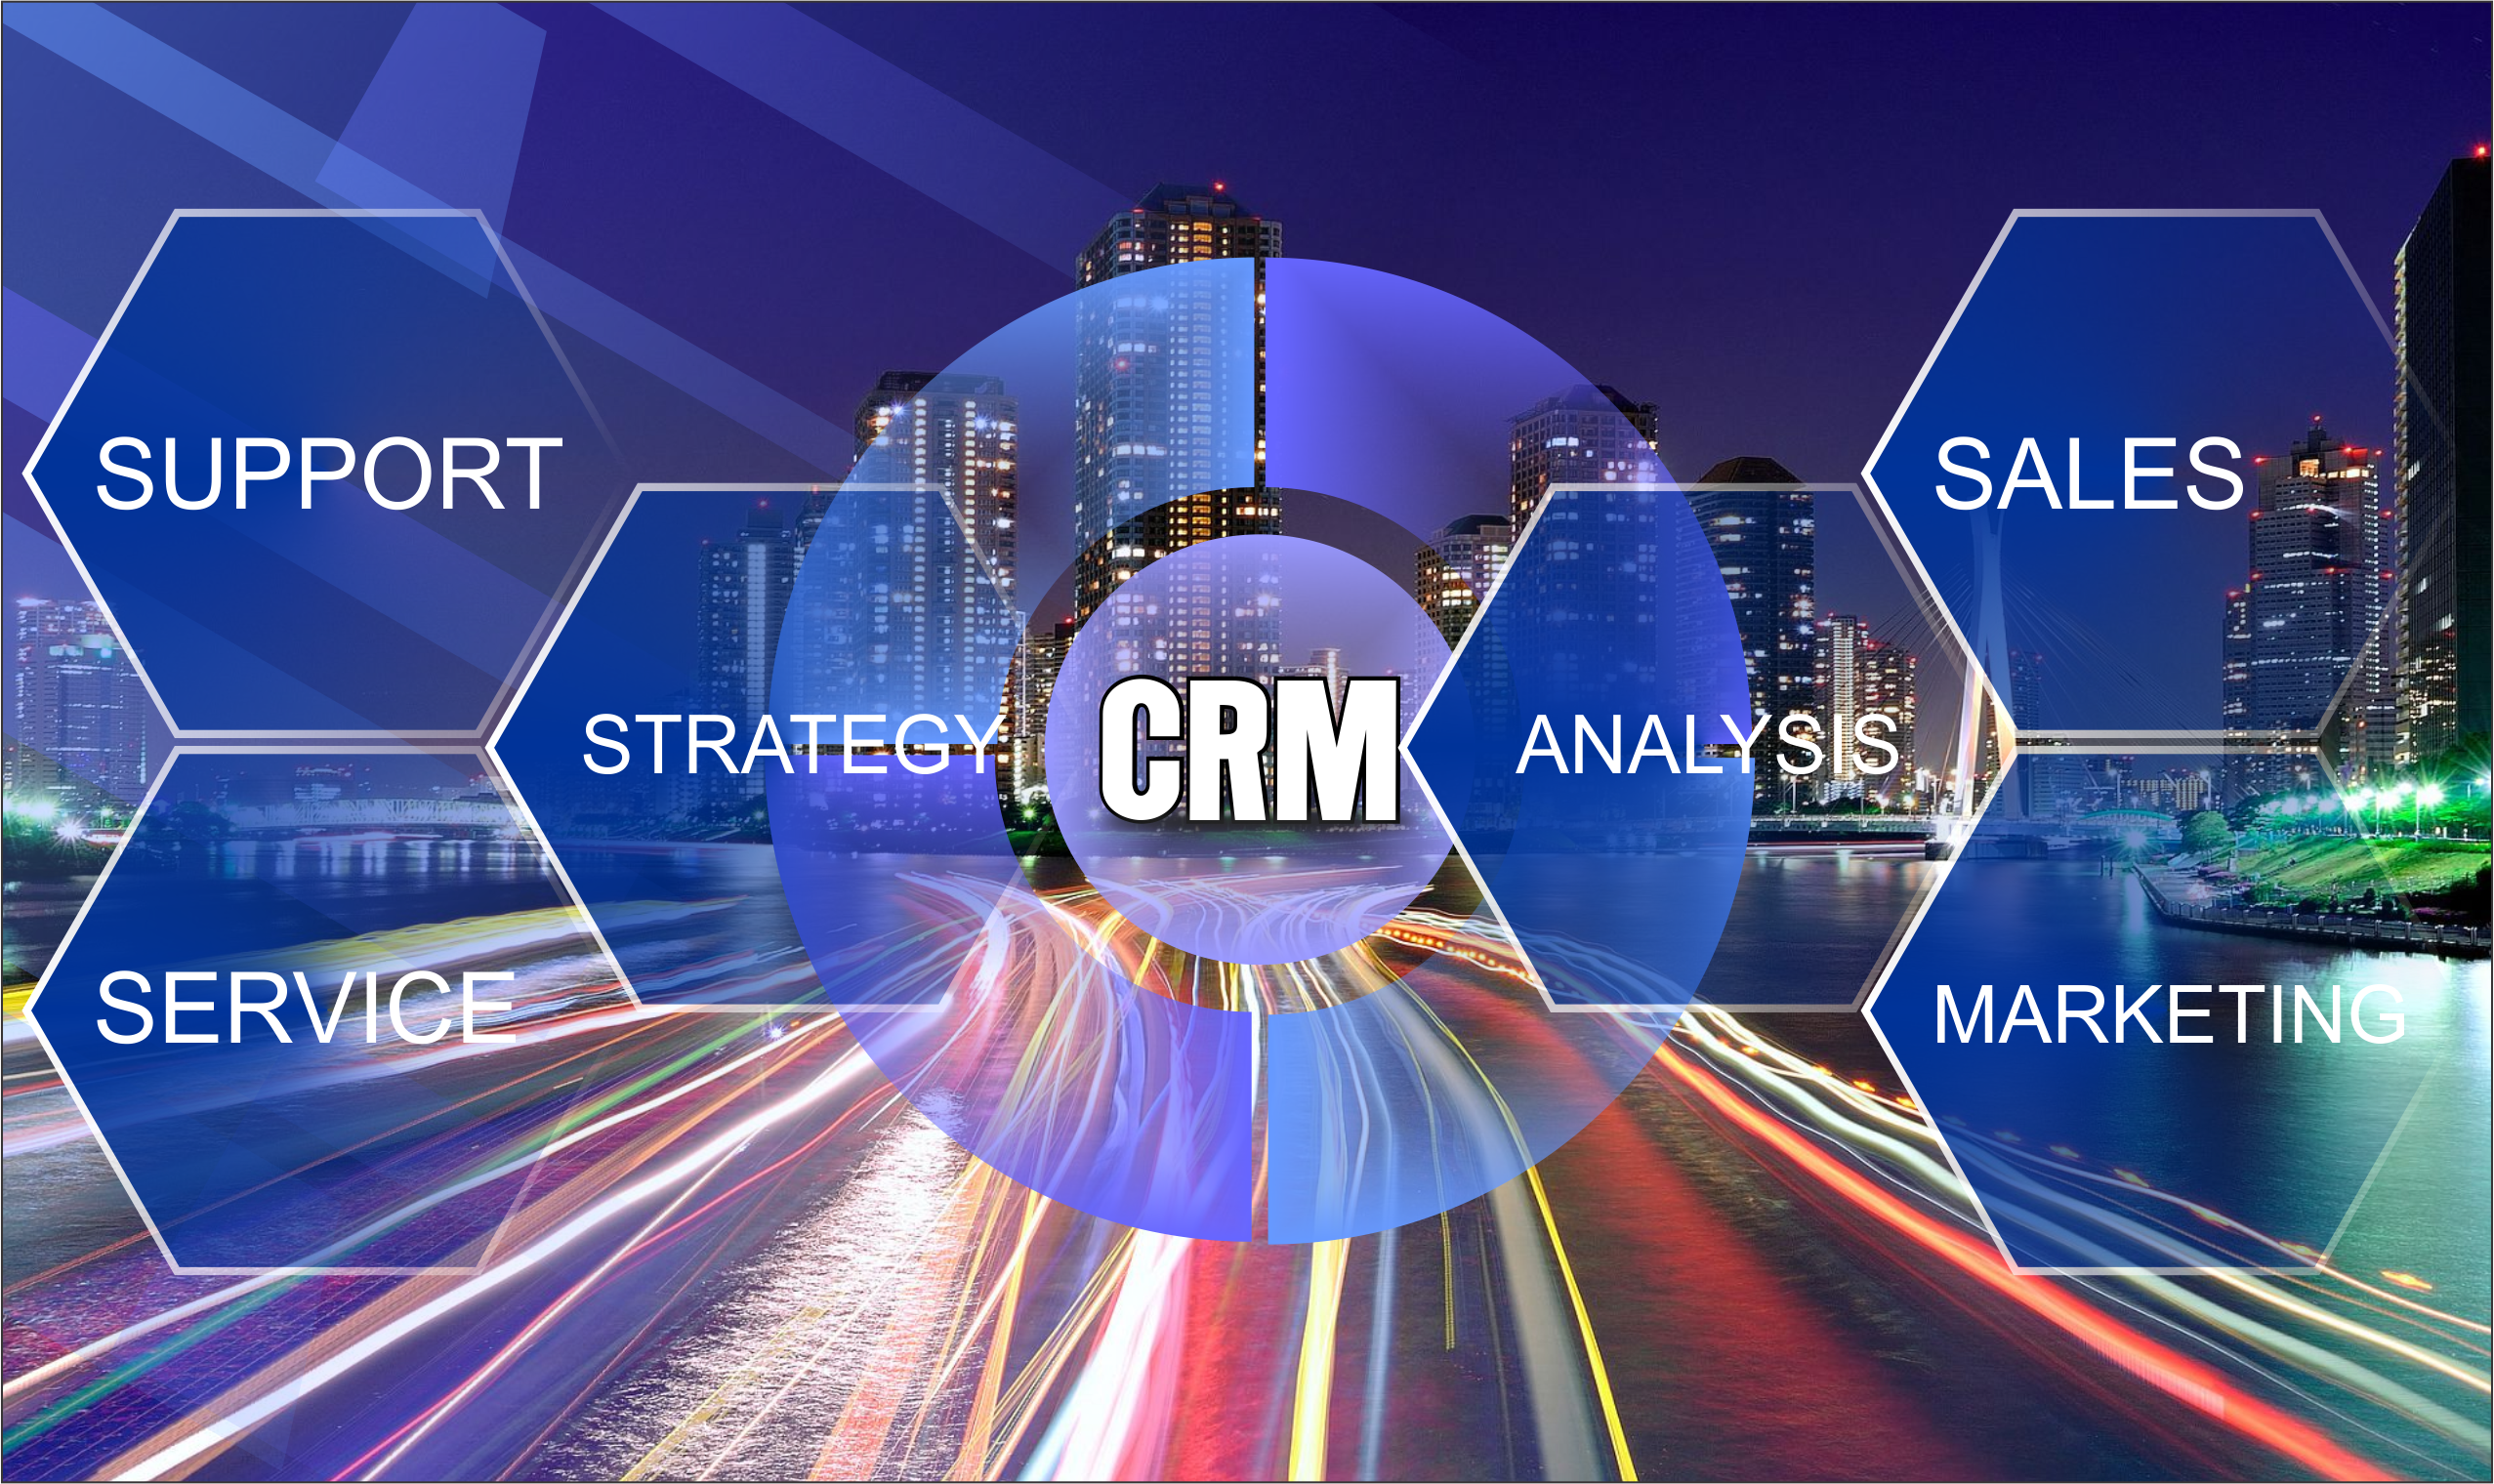 Benefits of using CRM for an organization